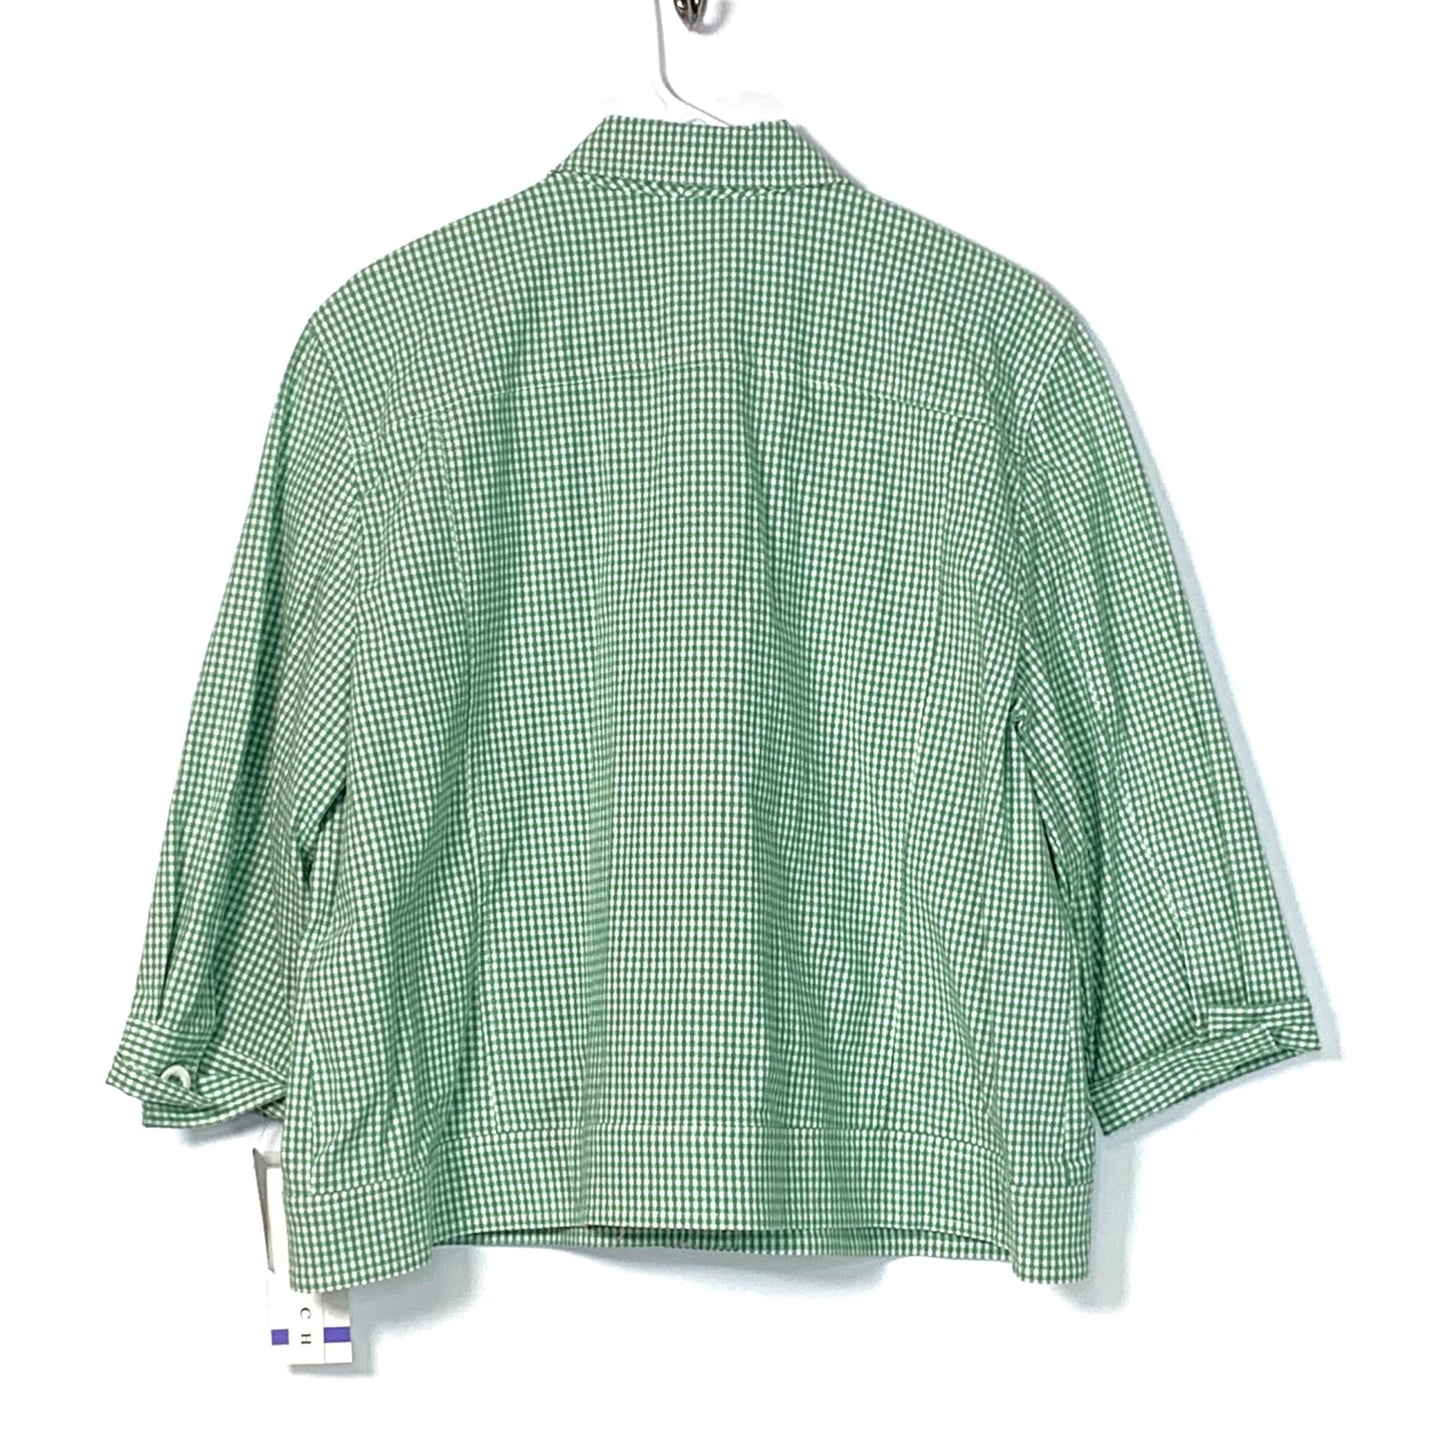 Alfred Dunner Womens Petite Jacket 18P Green Check “Just Checking”